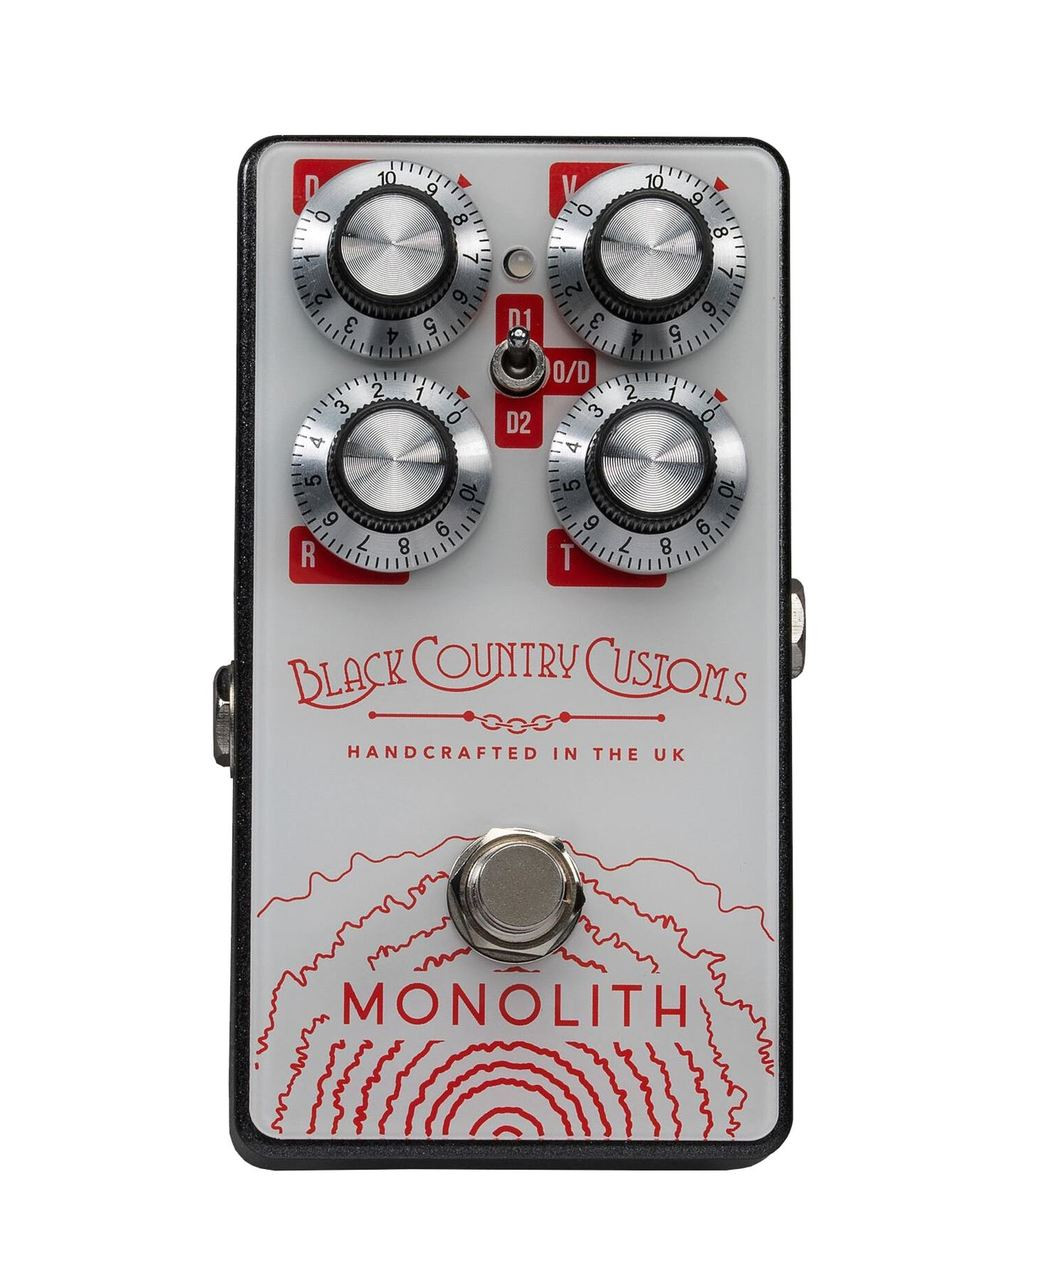 Laney Black Country Customs Monolith Distortion pedal